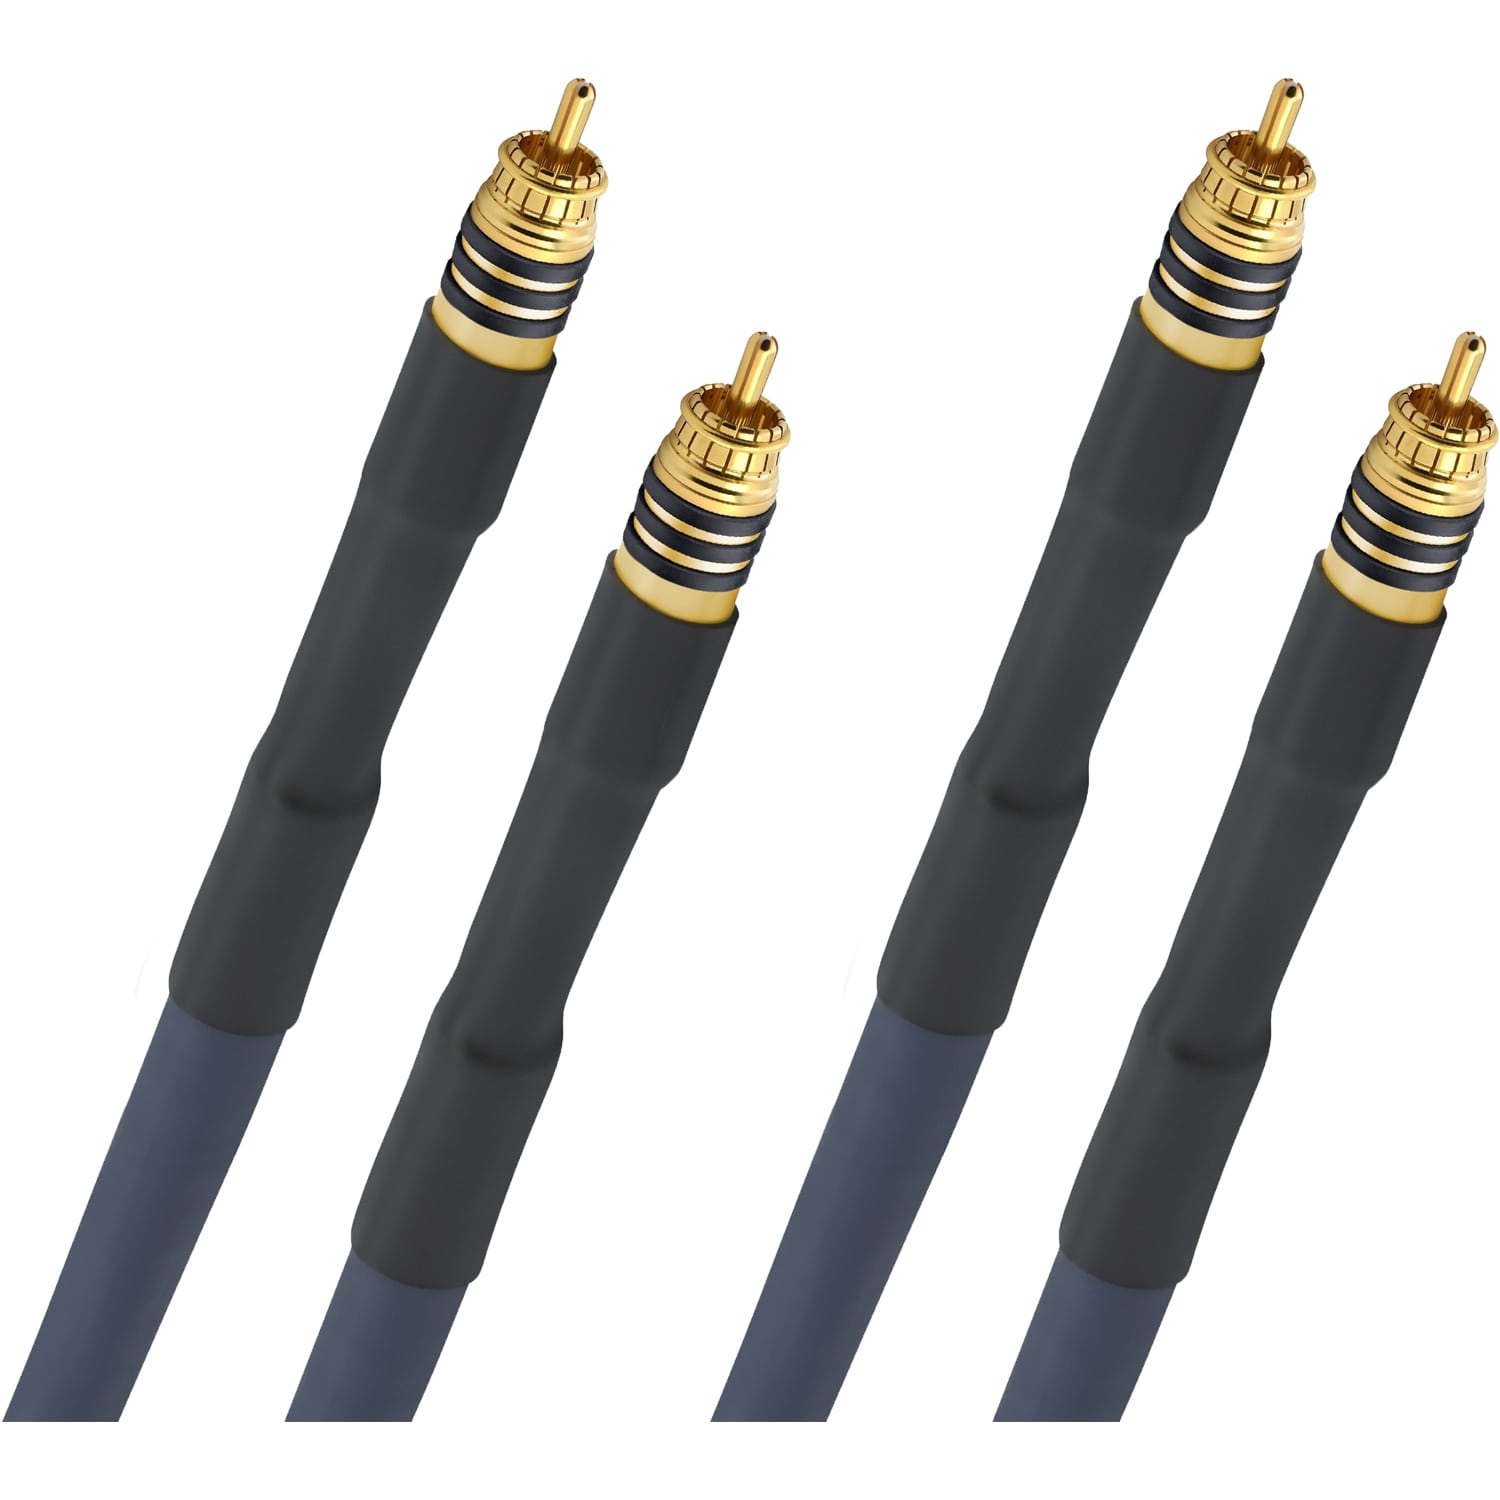 Кабели межблочные аудио Oehlbach STATE OF THE ART XXL Cable RCA, 2x1,25m, gold, D1C13113 силовые кабели oehlbach state of the art xxl powercord 3m d1c13062